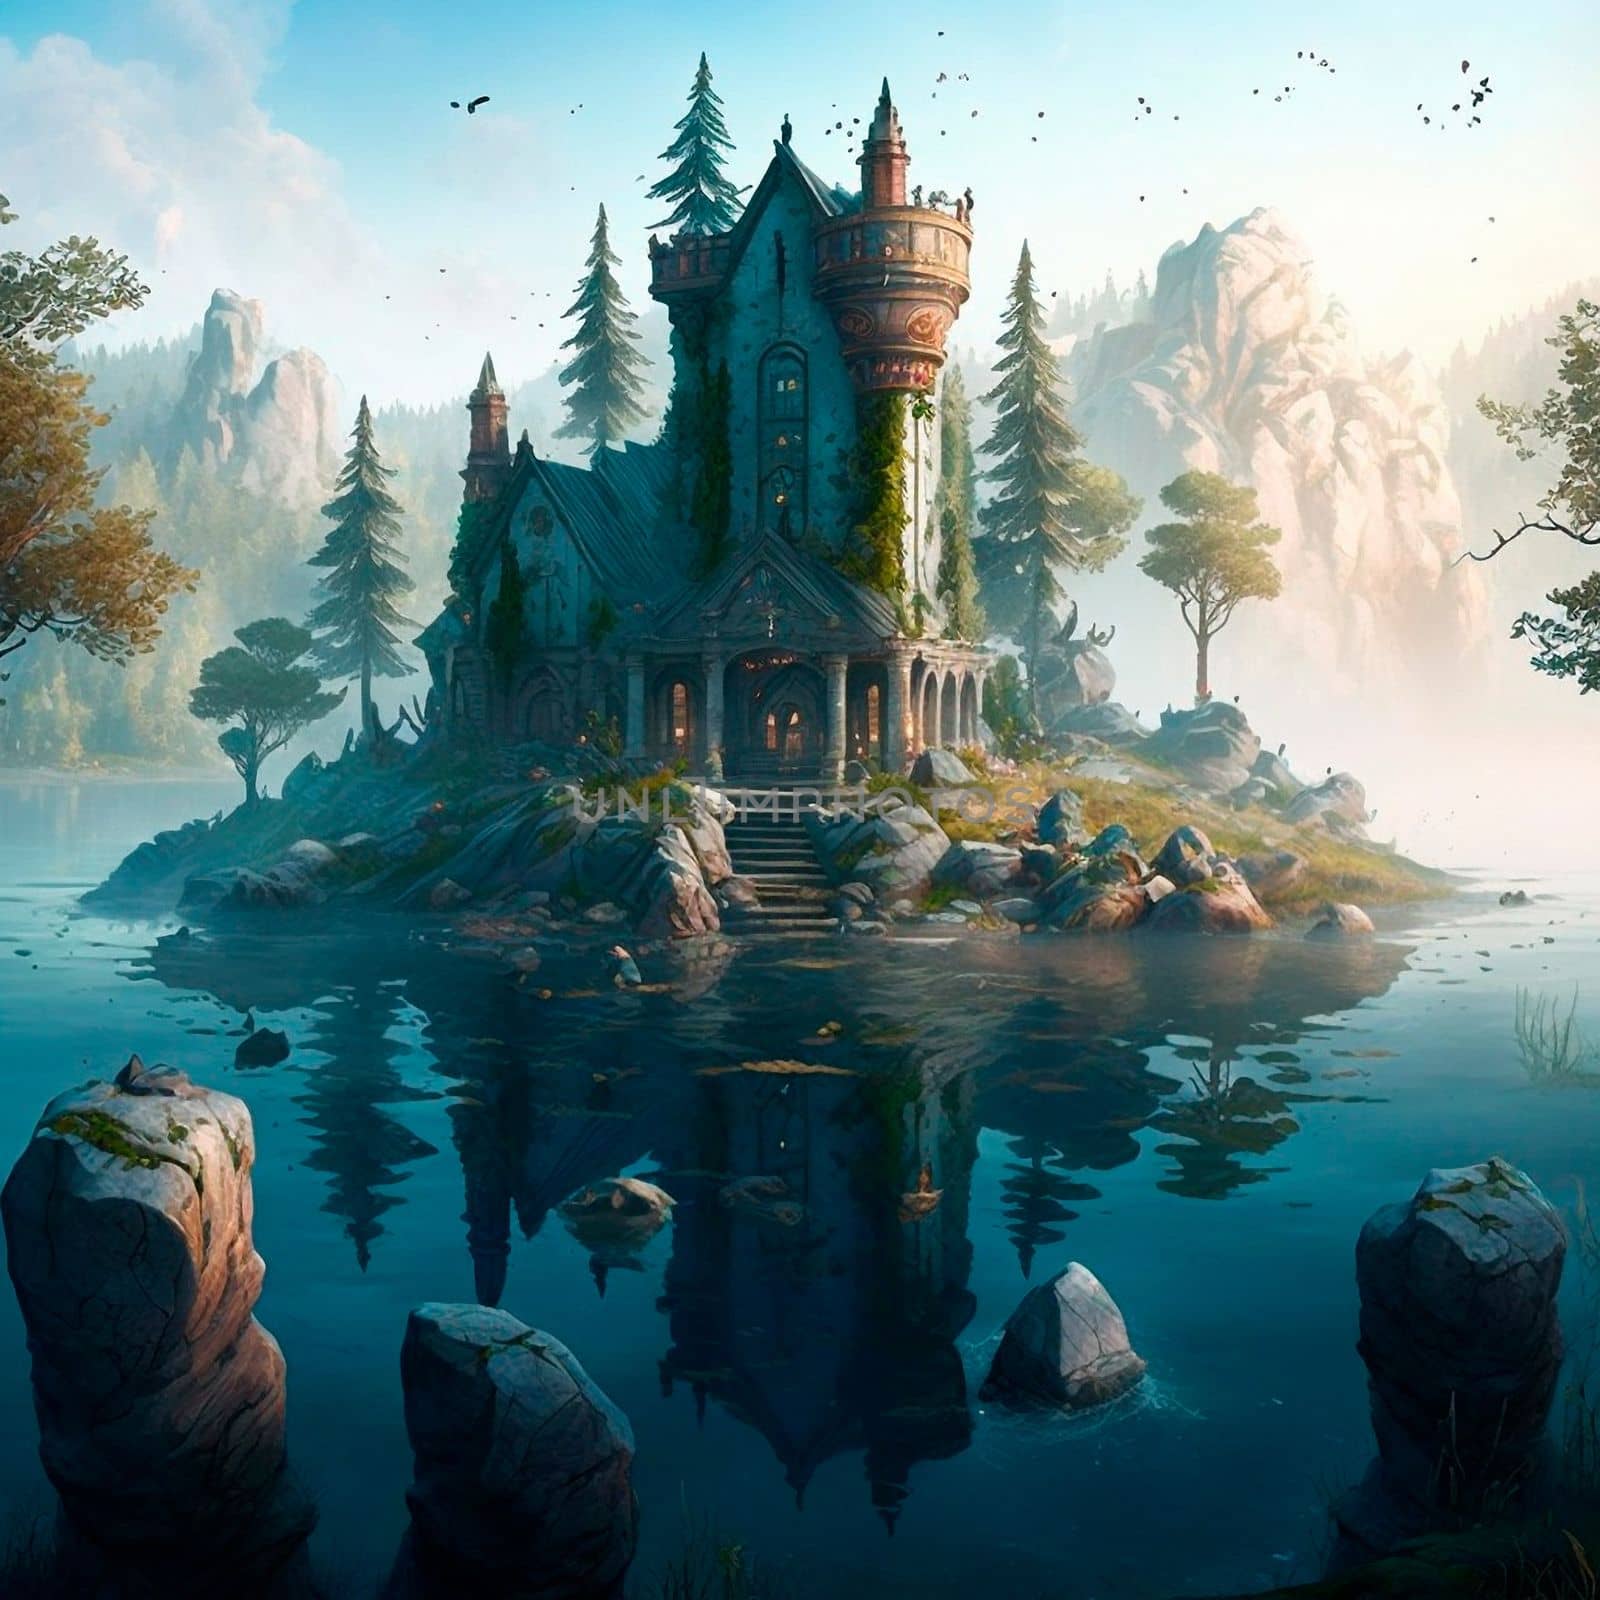 Mystical mysterious ruins on the lake islands by NeuroSky